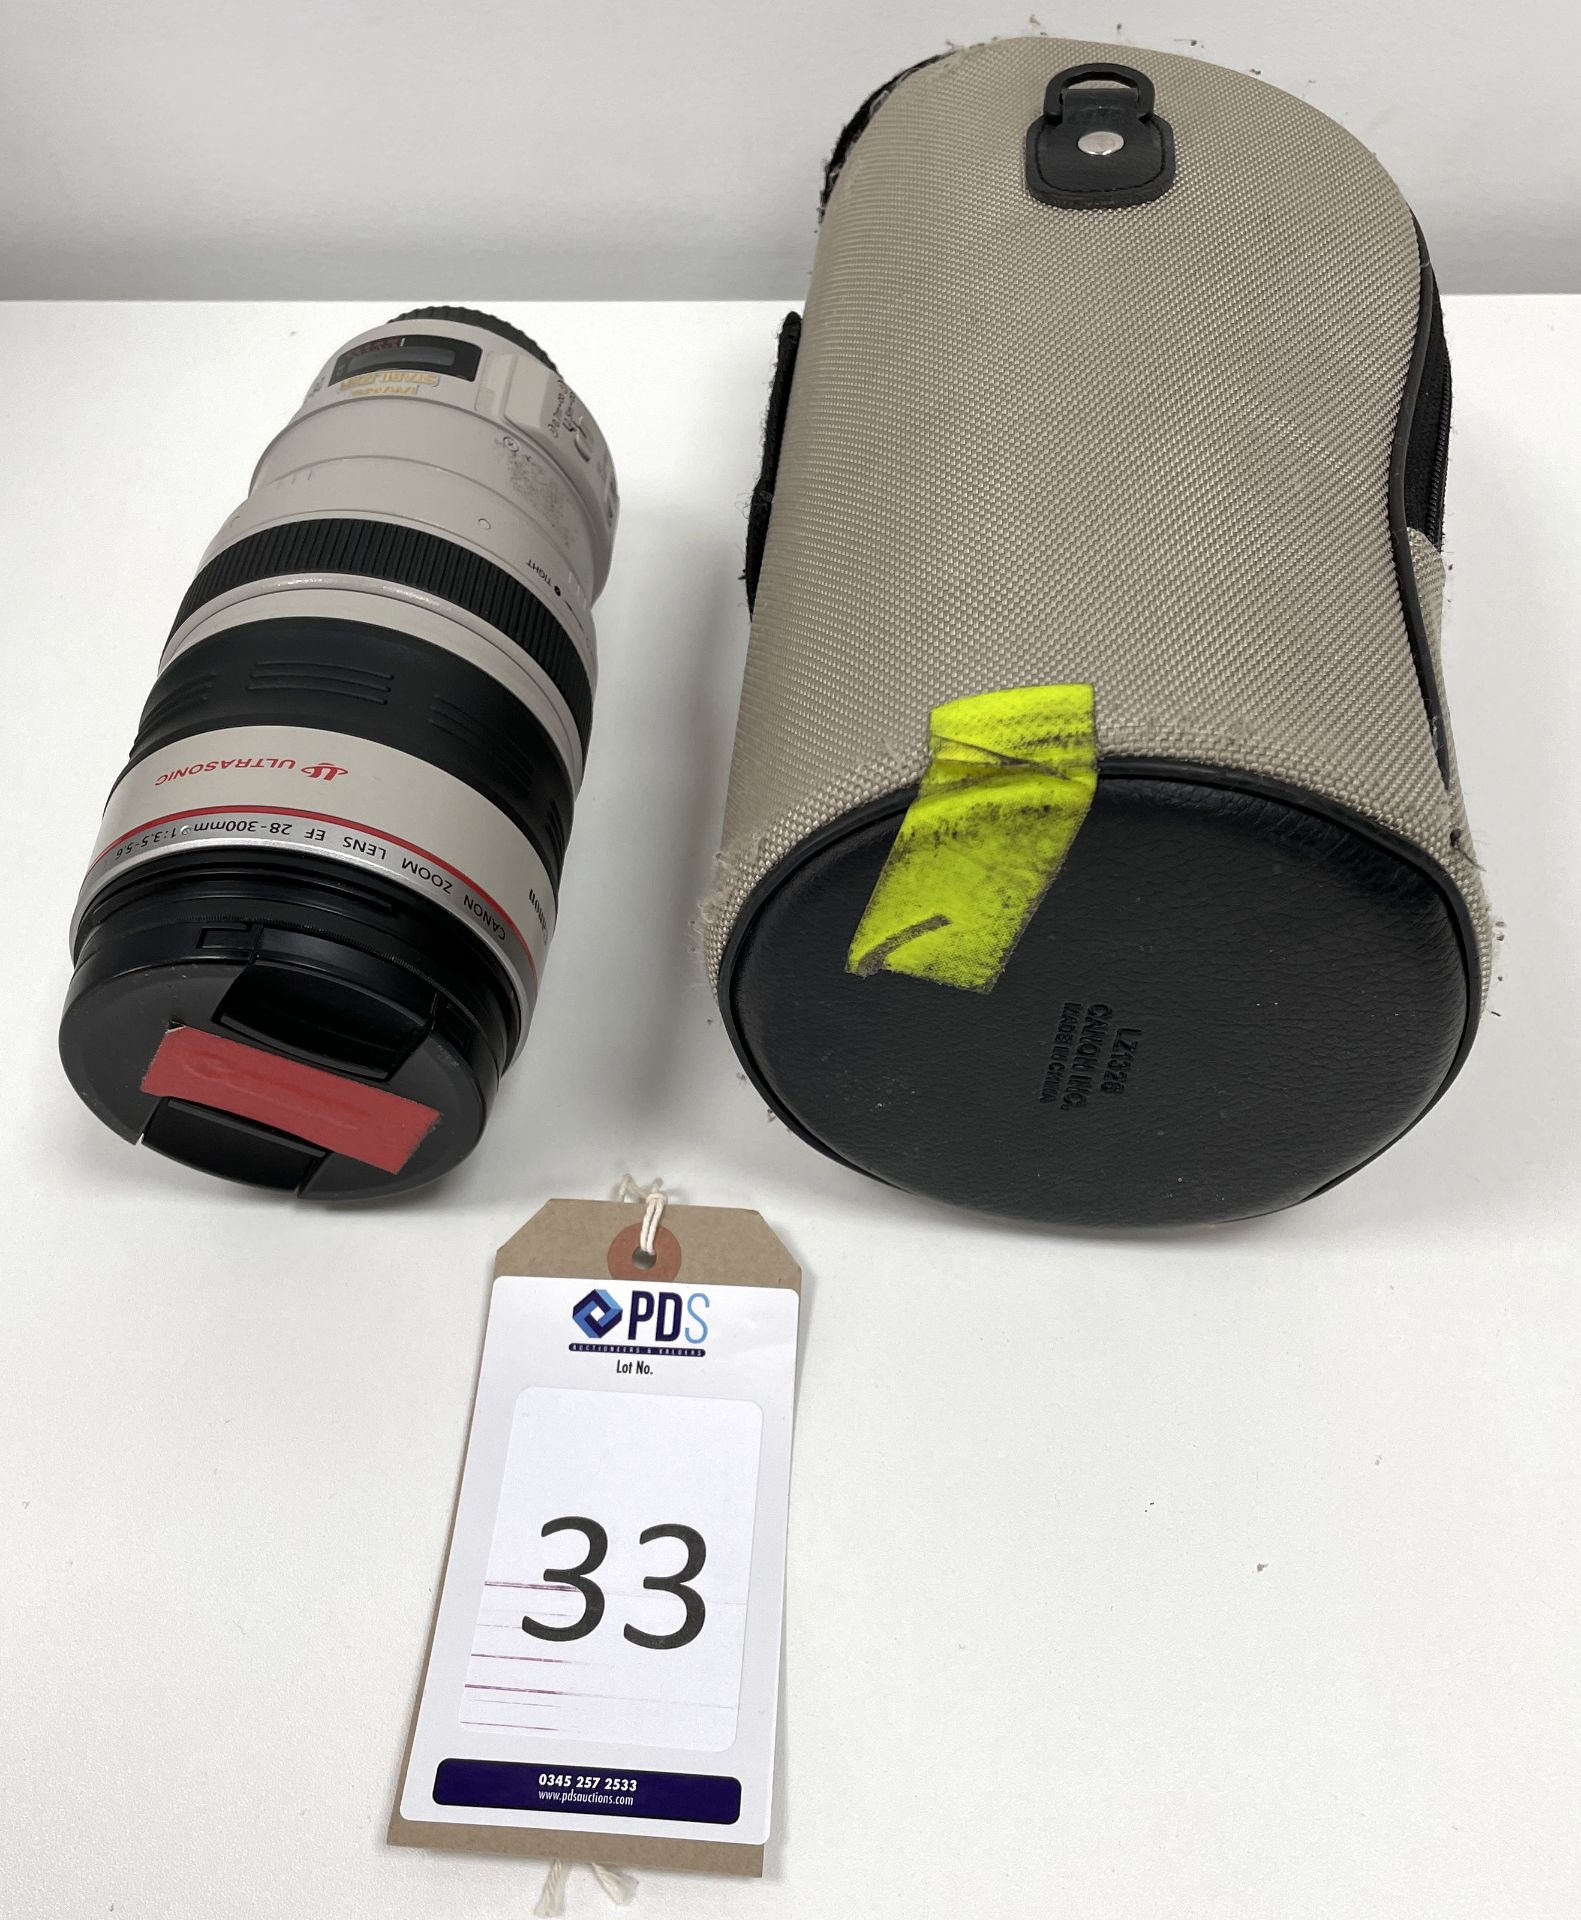 Canon EF 28-300mm Ultrasonic Zoom Lens, Serial Number 118641 (Location: Westminster. Please Refer to